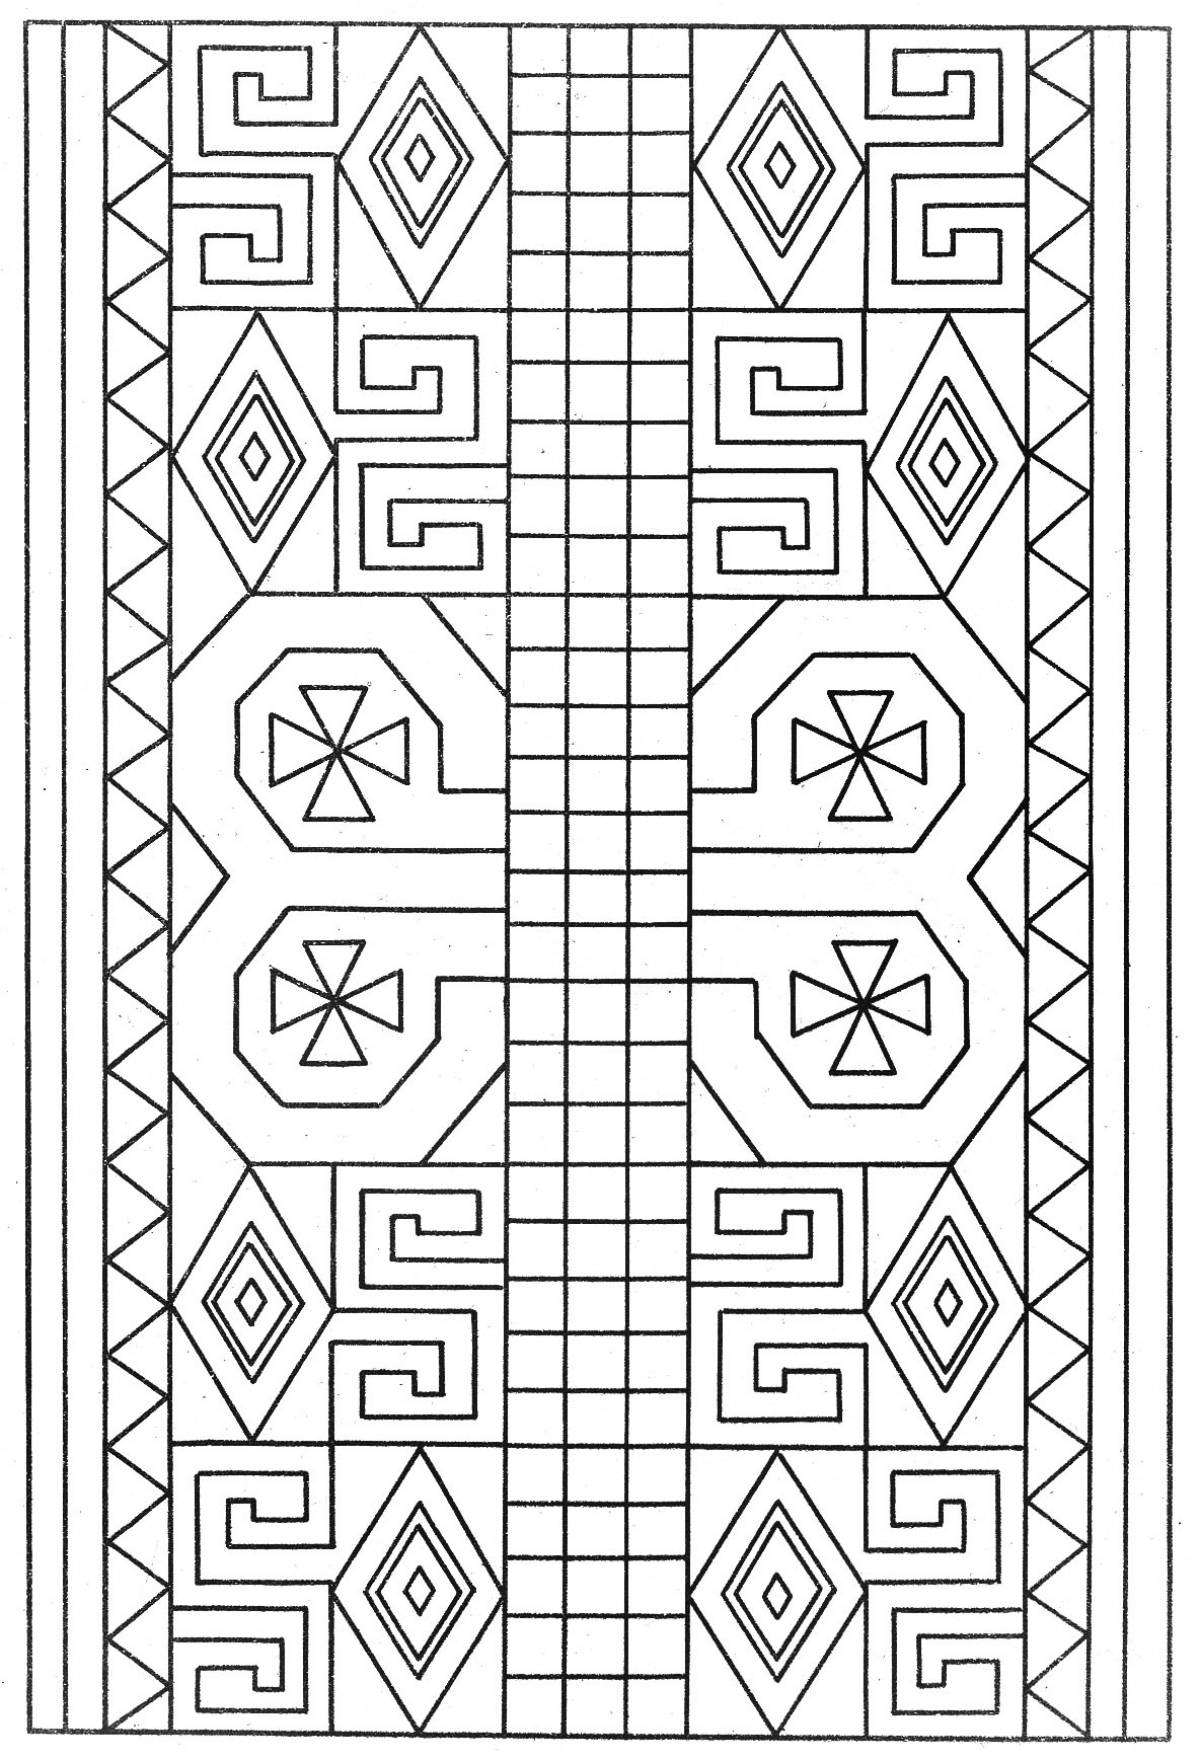 Coloring traditional Chuvash patterns